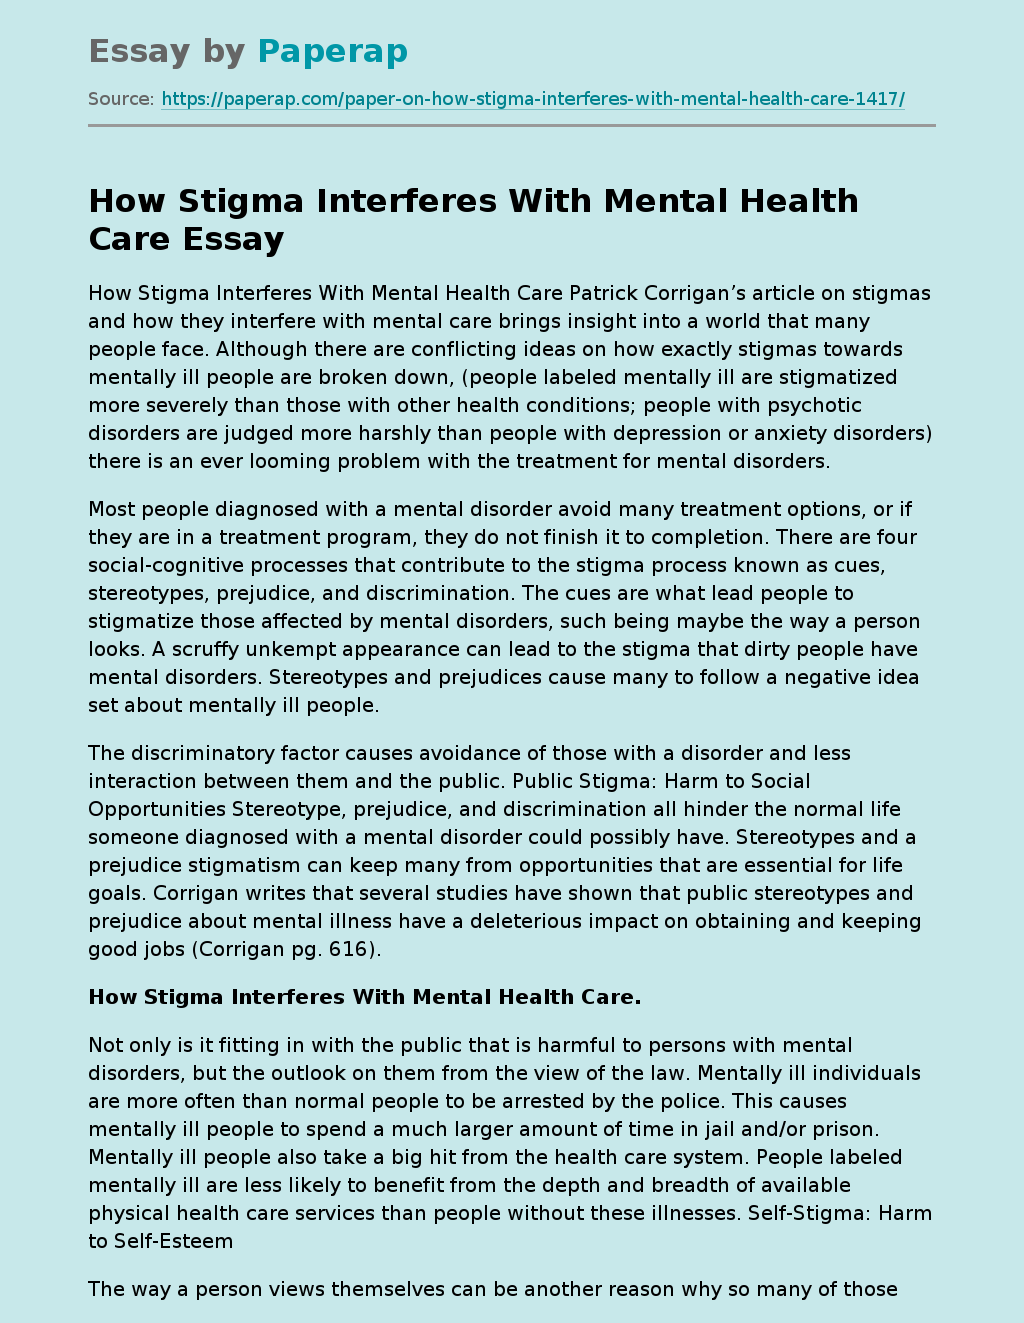 How Stigma Interferes With Mental Health Care